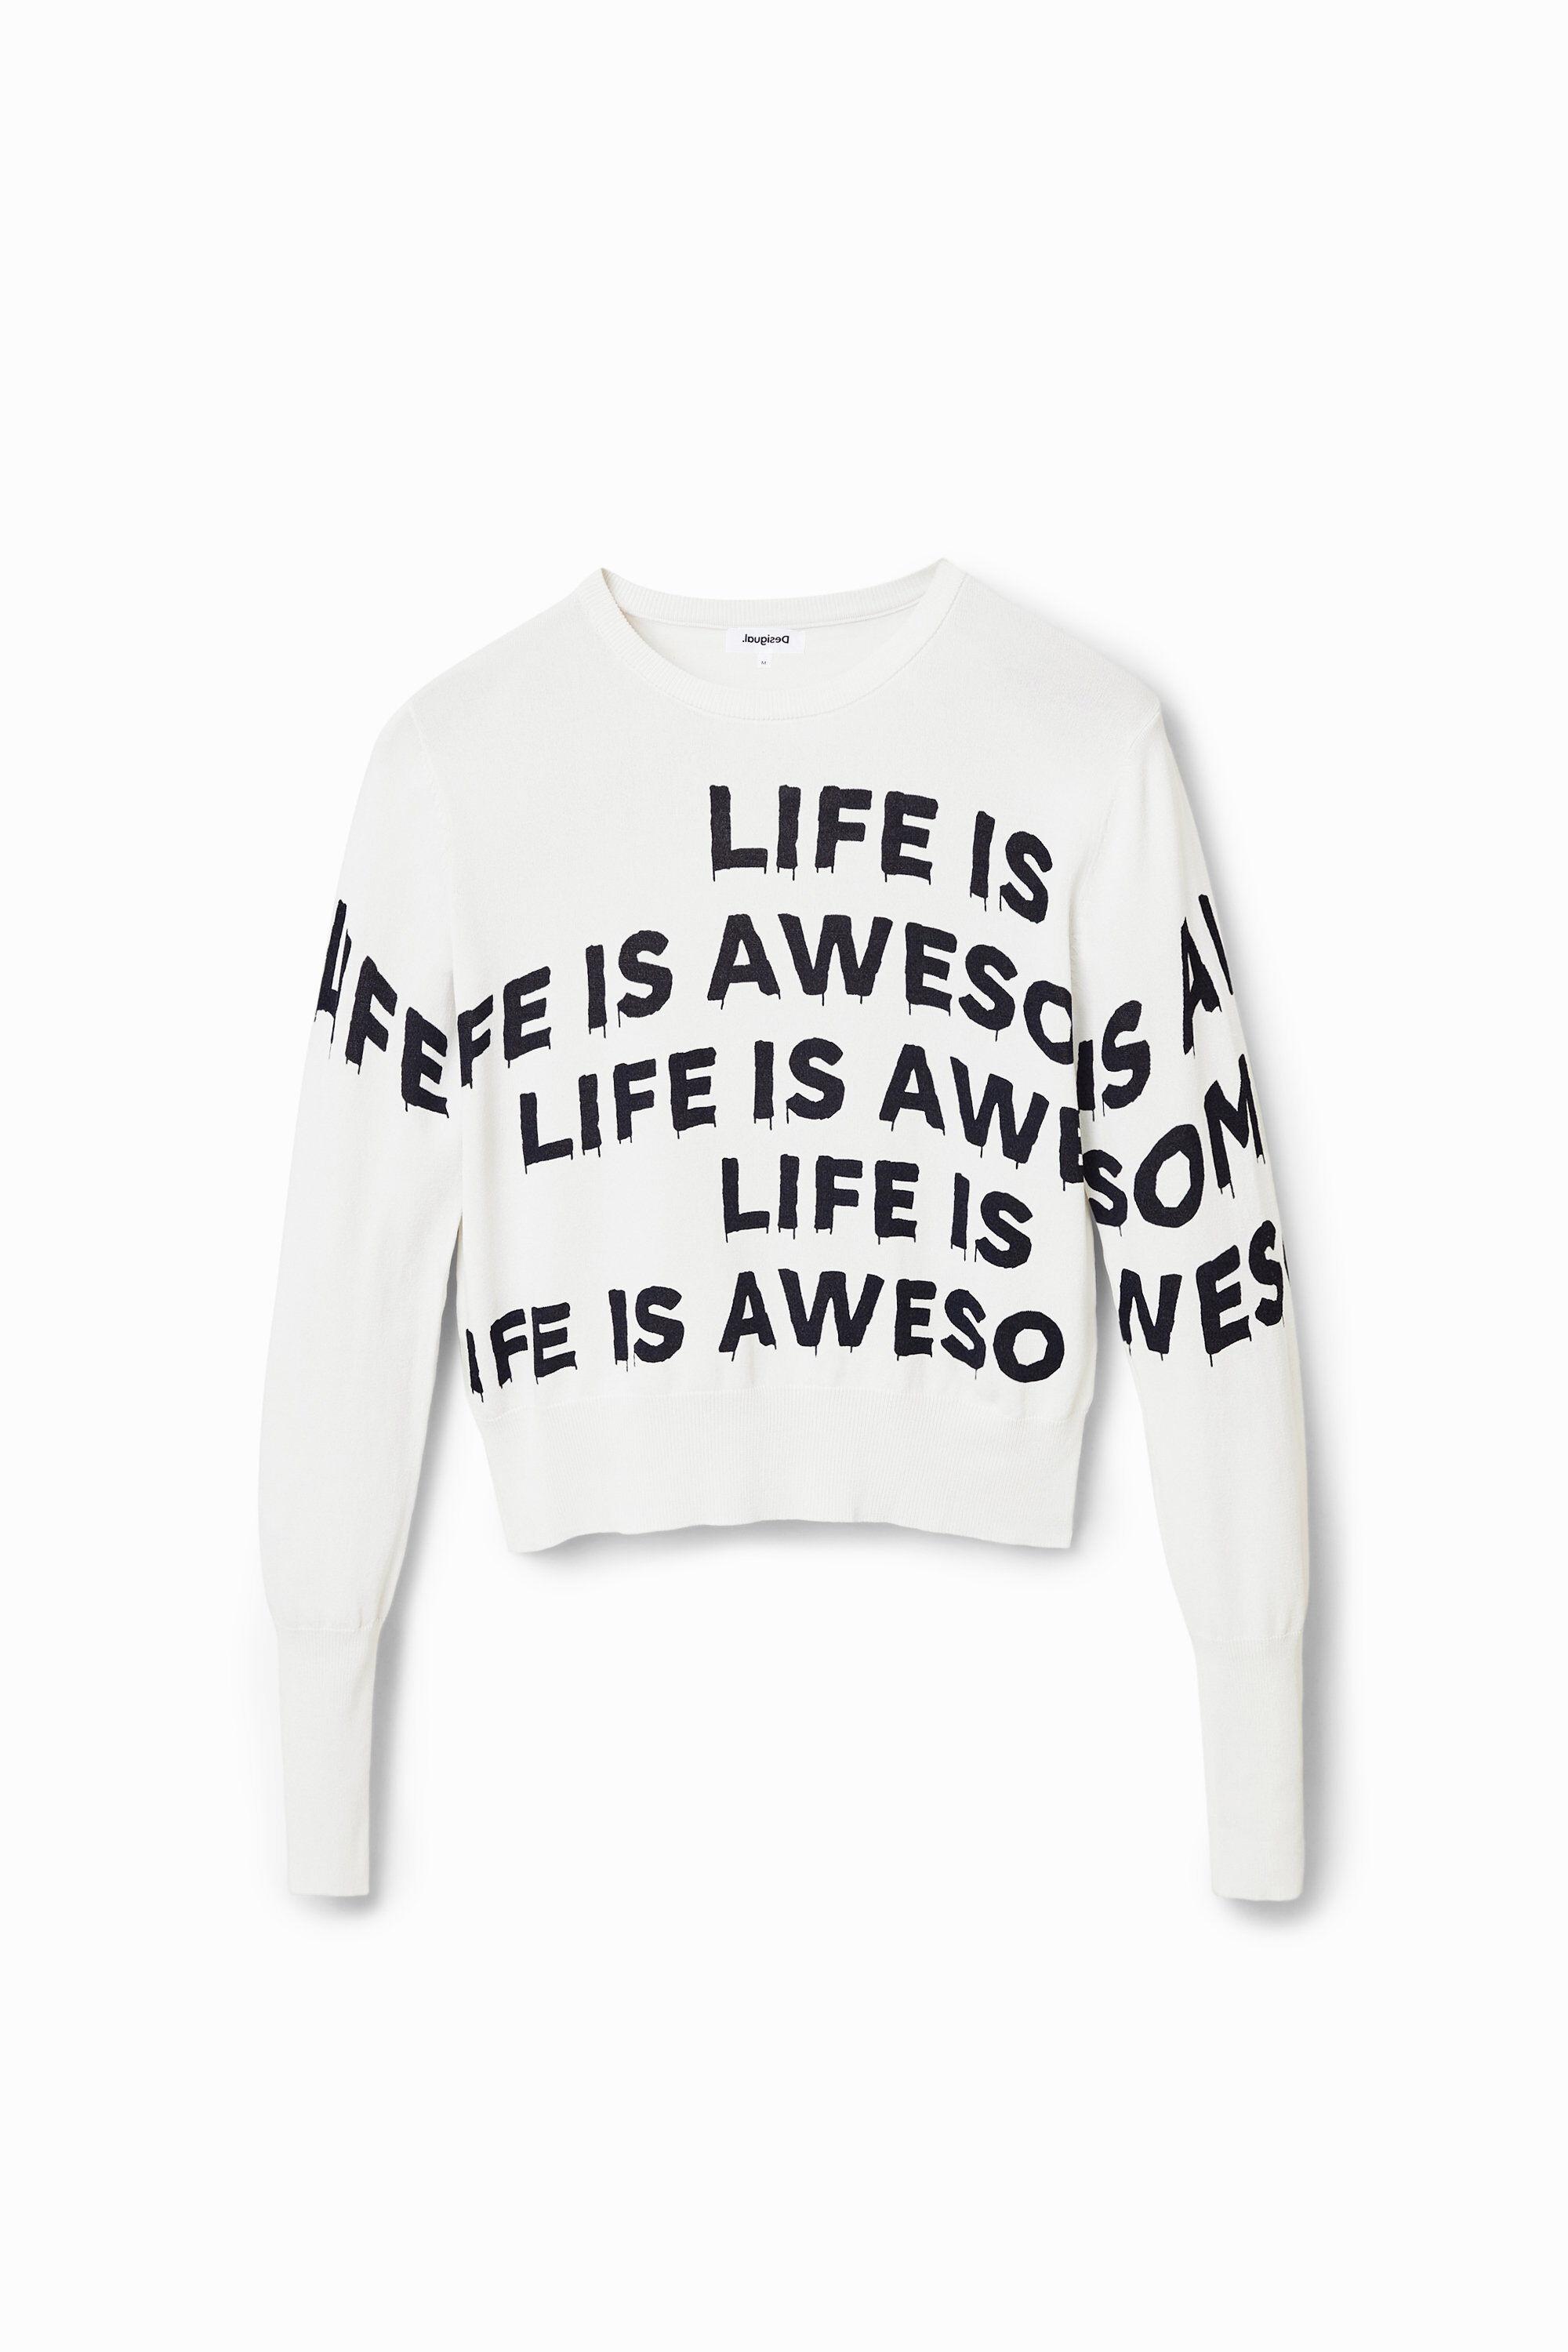 Desigual "life Is Awesome" Pullover in Black | Lyst